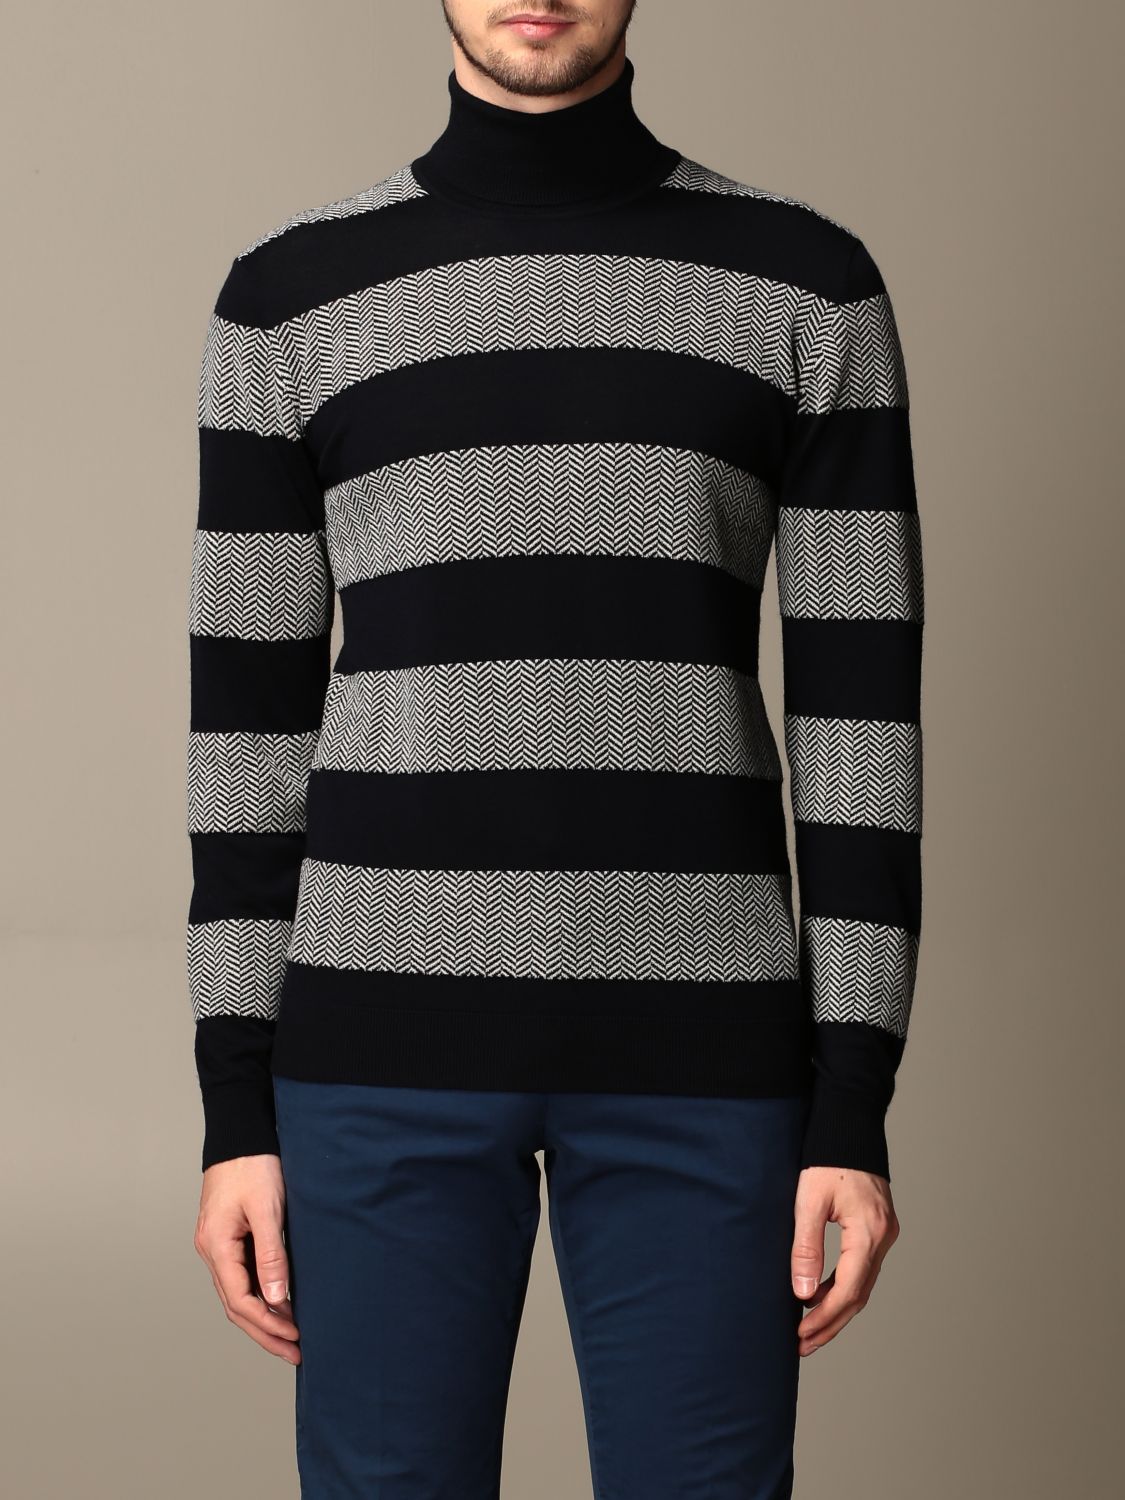 Giorgio Armani Outlet: turtleneck in cashmere and virgin wool with ...